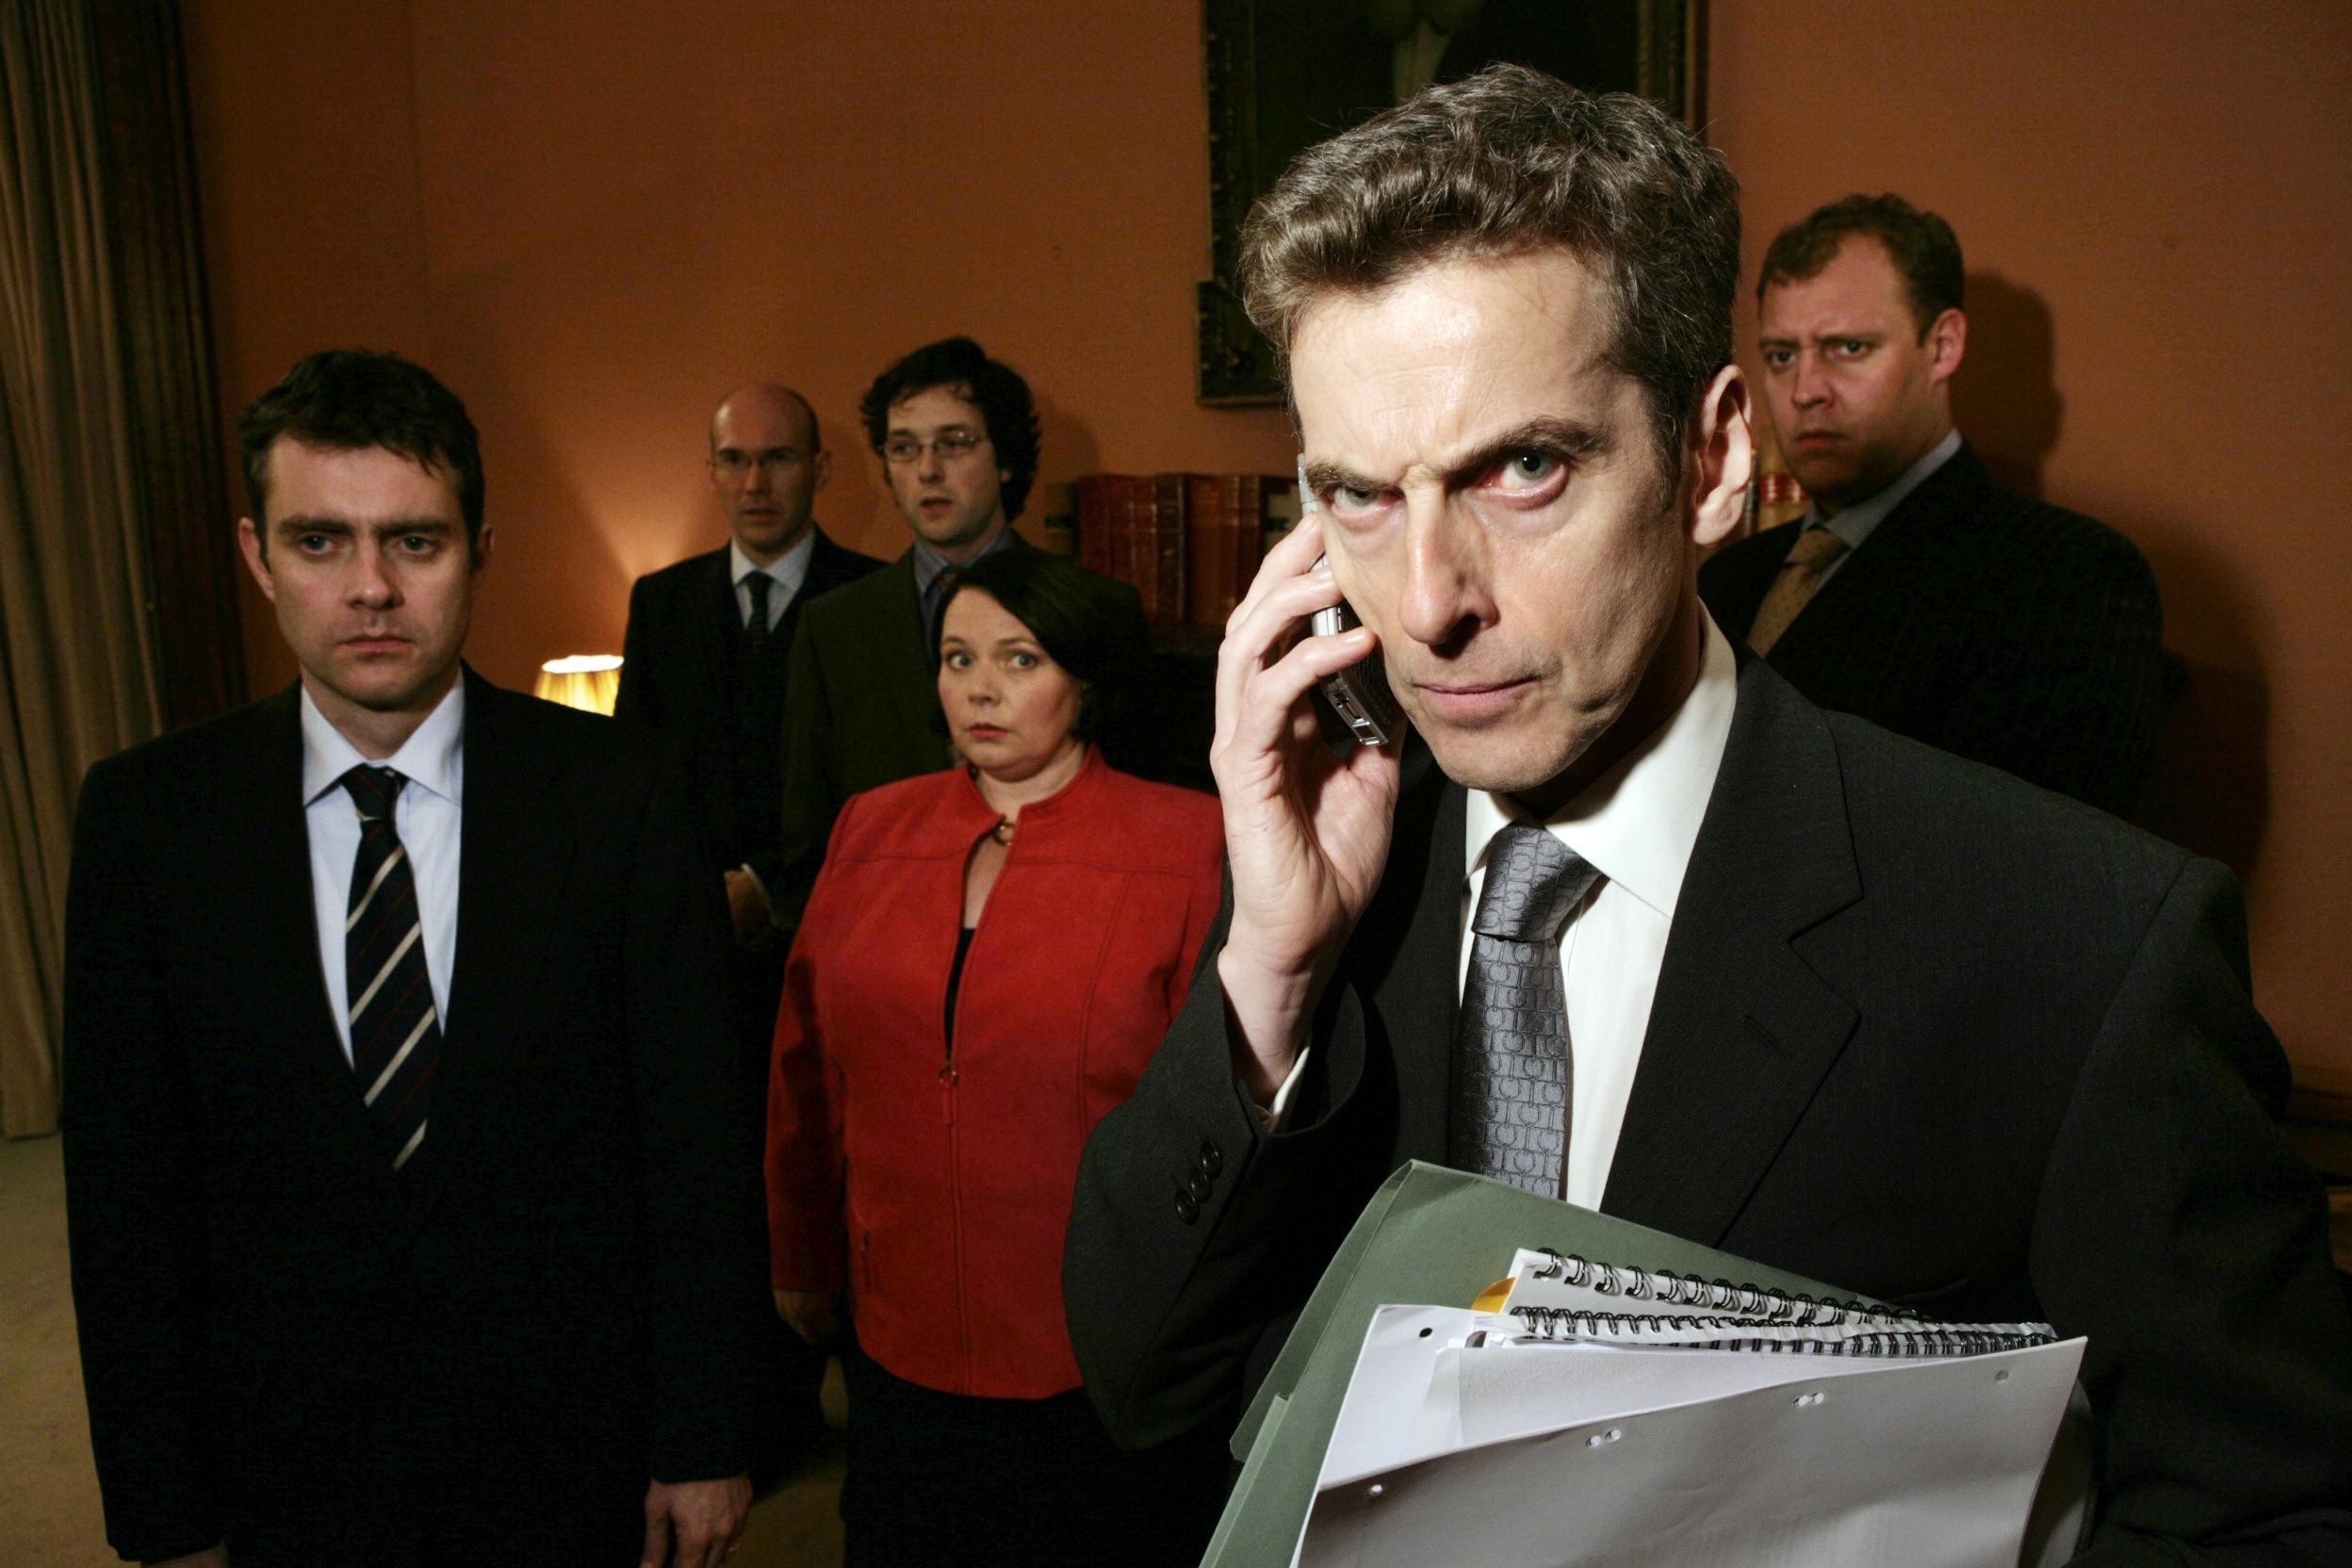 Peter Capaldi and the cast in?Iannucci’s brilliant political sitcom ‘The Thick of It’